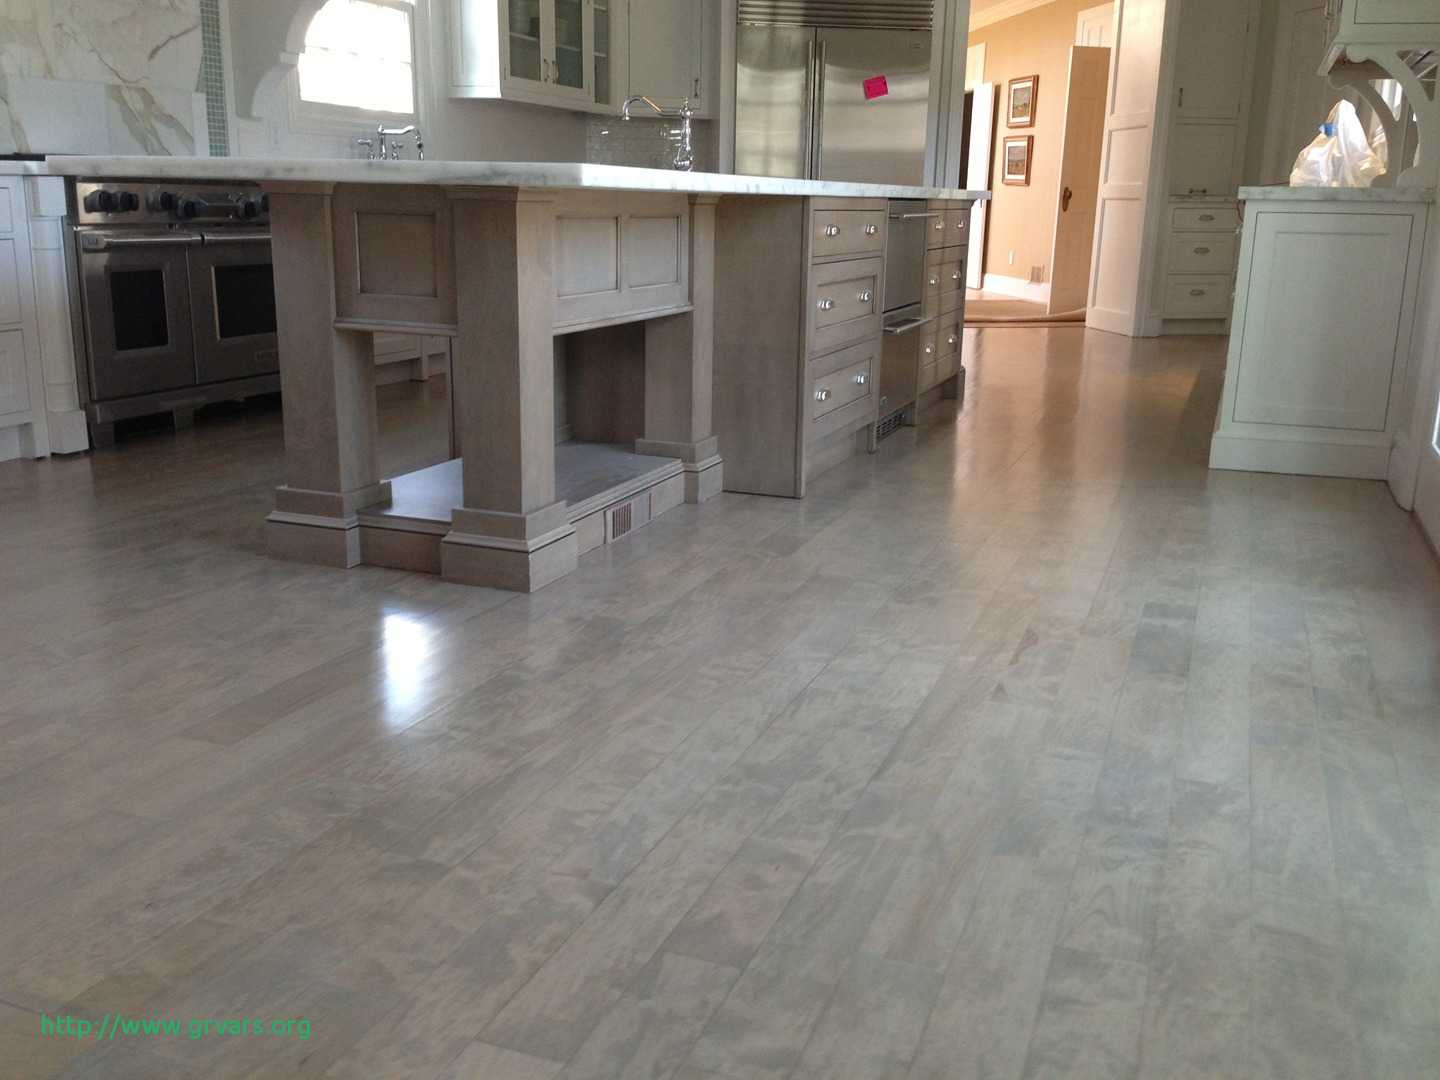 16 Famous Hardwood Floor Repair Boston 2024 free download hardwood floor repair boston of 24 ac289lagant how to patch a hardwood floor ideas blog within how to patch a hardwood floor charmant j r hardwood floors l l c home